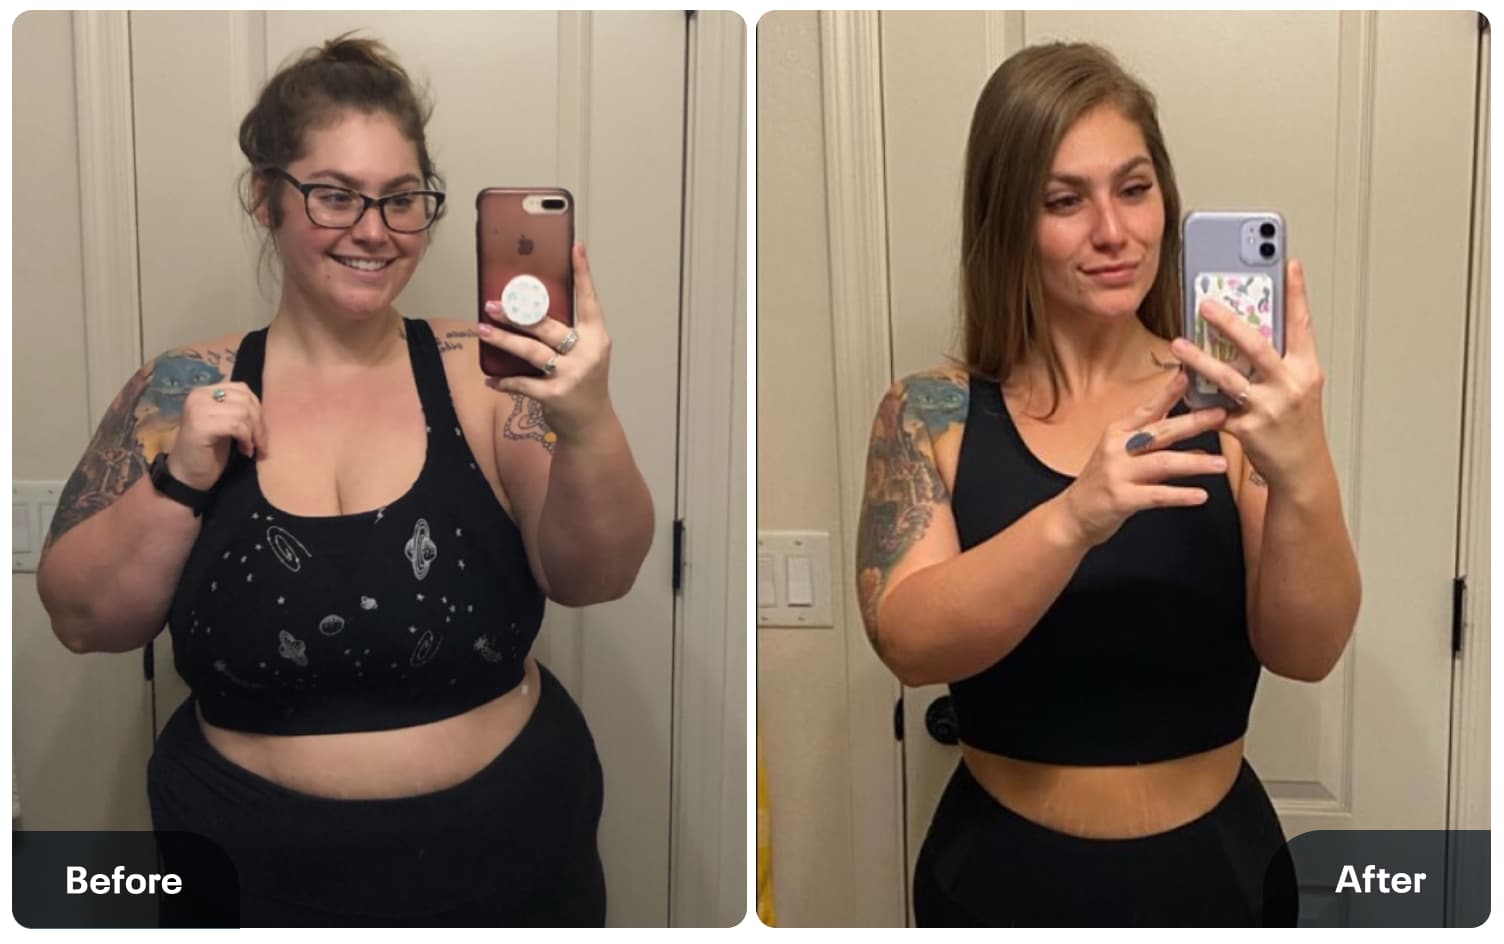 Victoria Feldt Lost 100 Pounds in 1 Year with MyFitnessPal